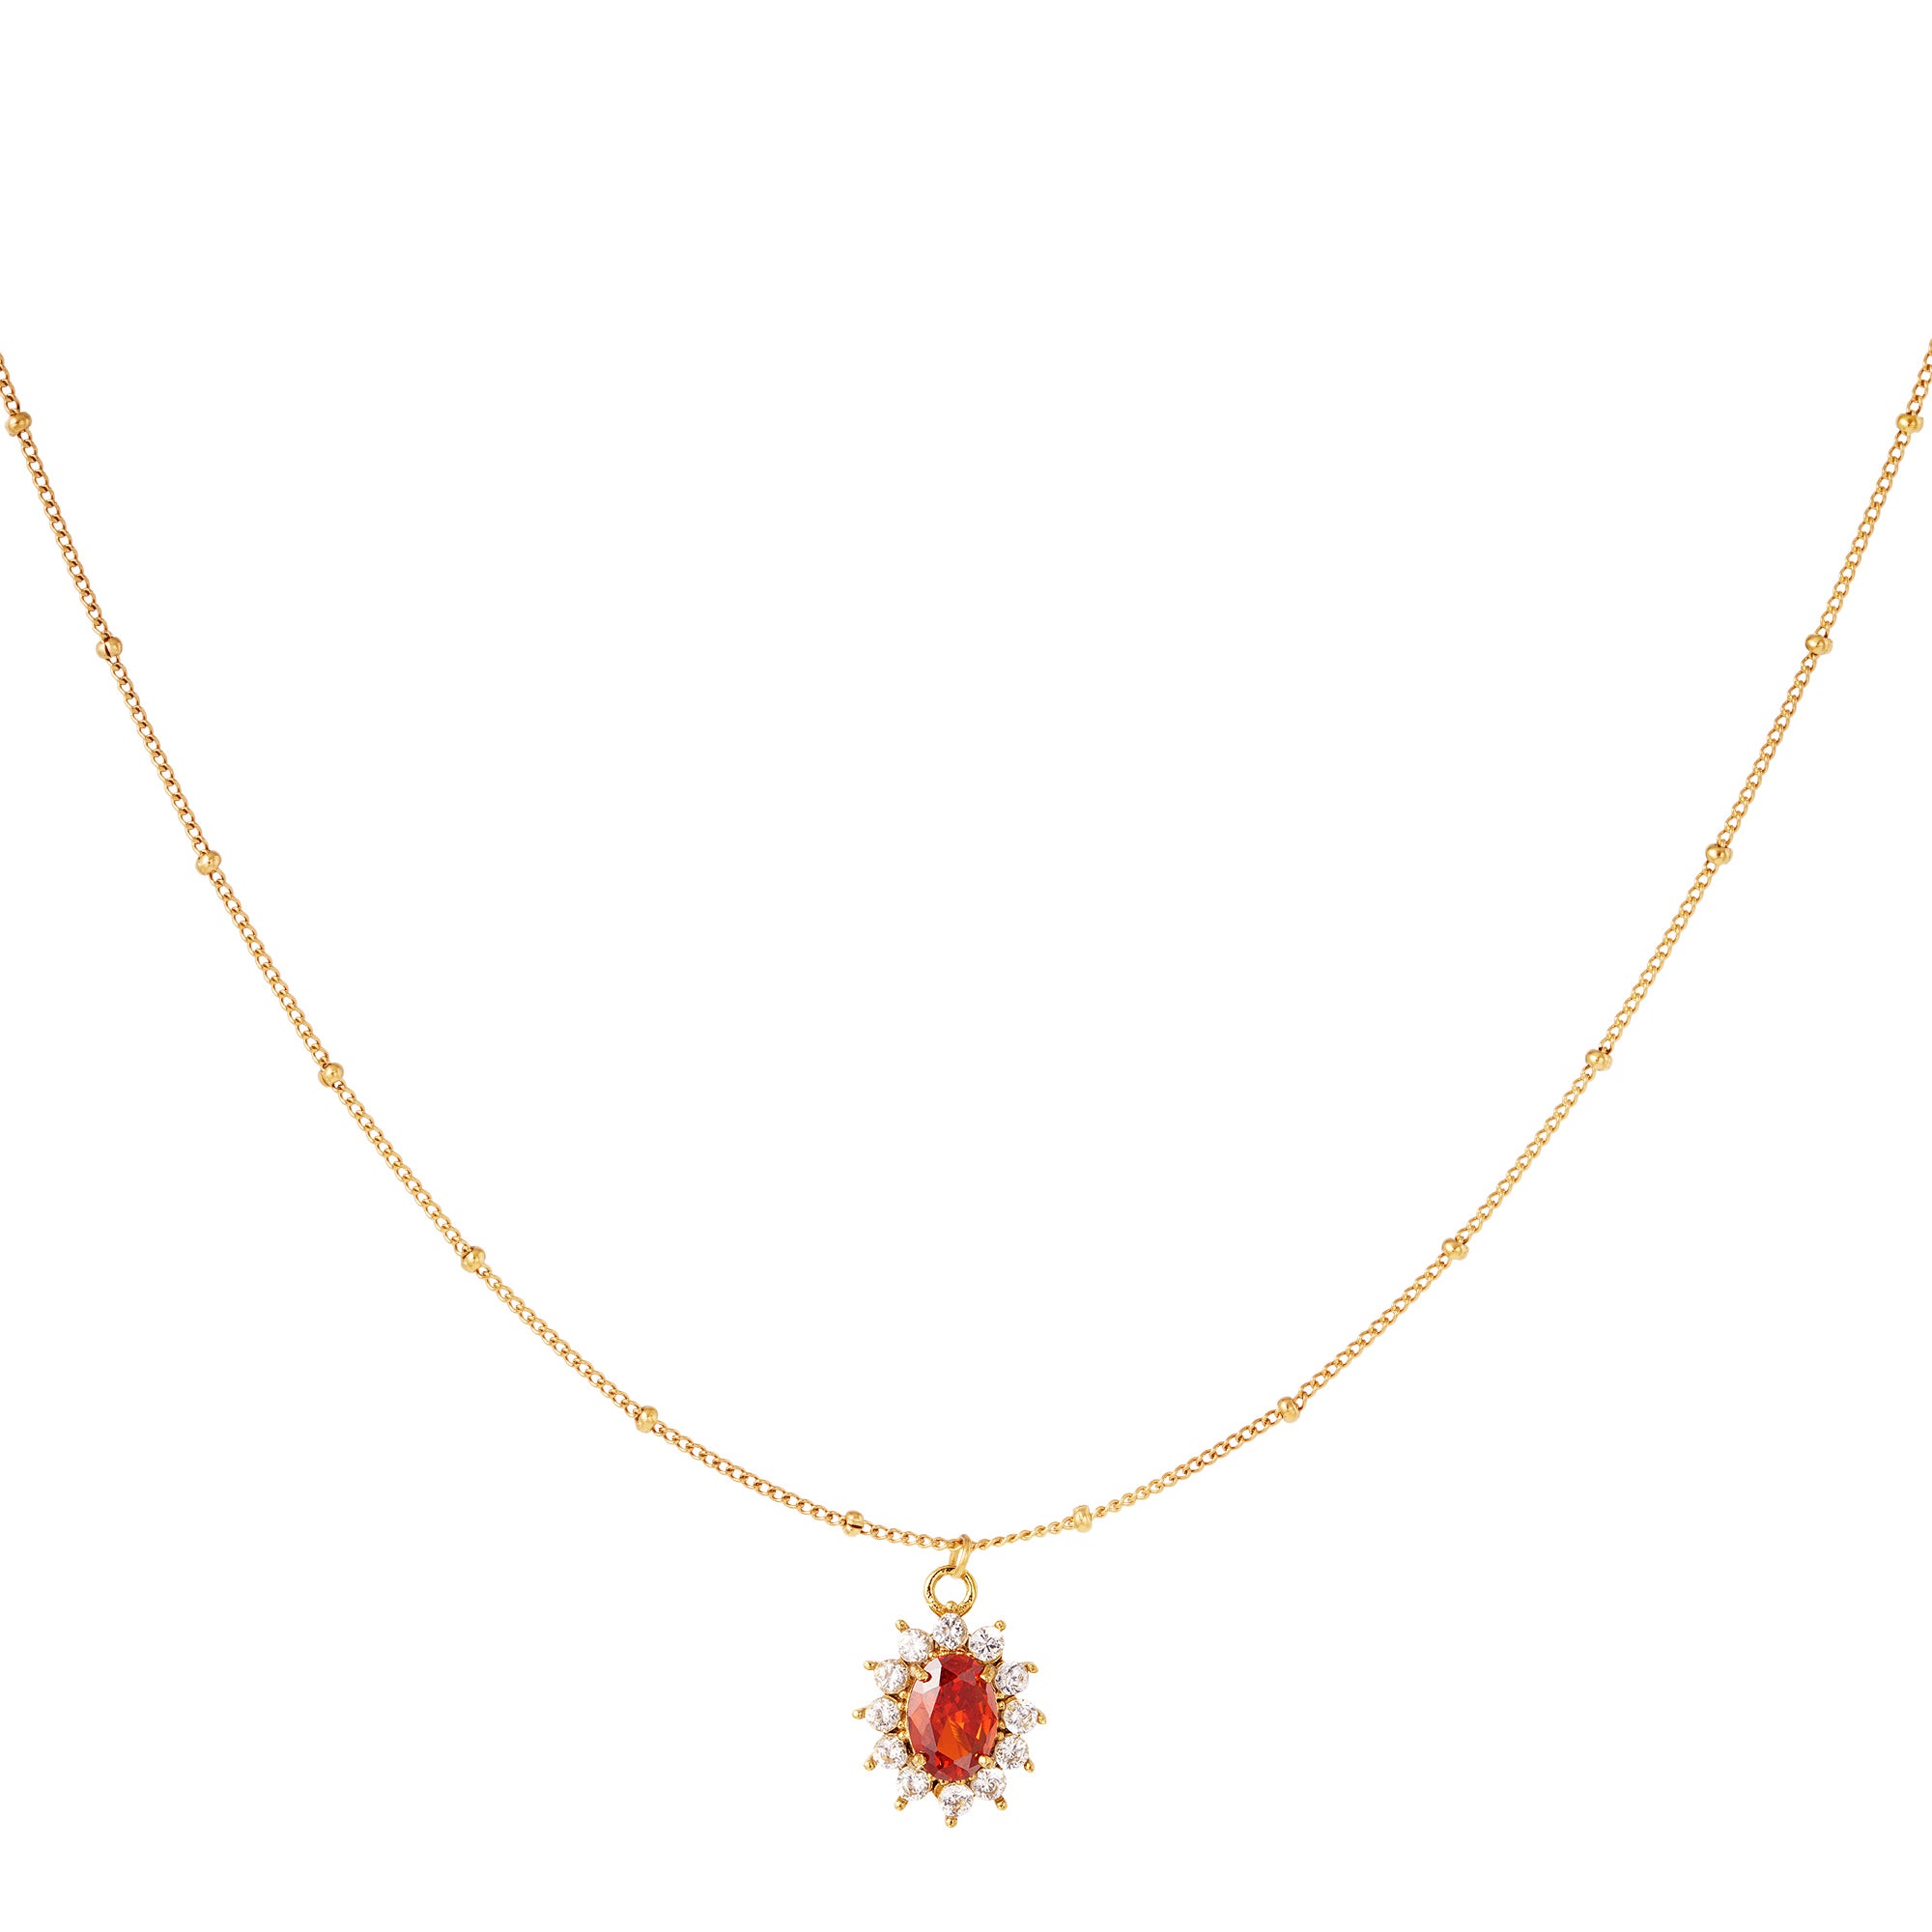 Necklace royal stone red